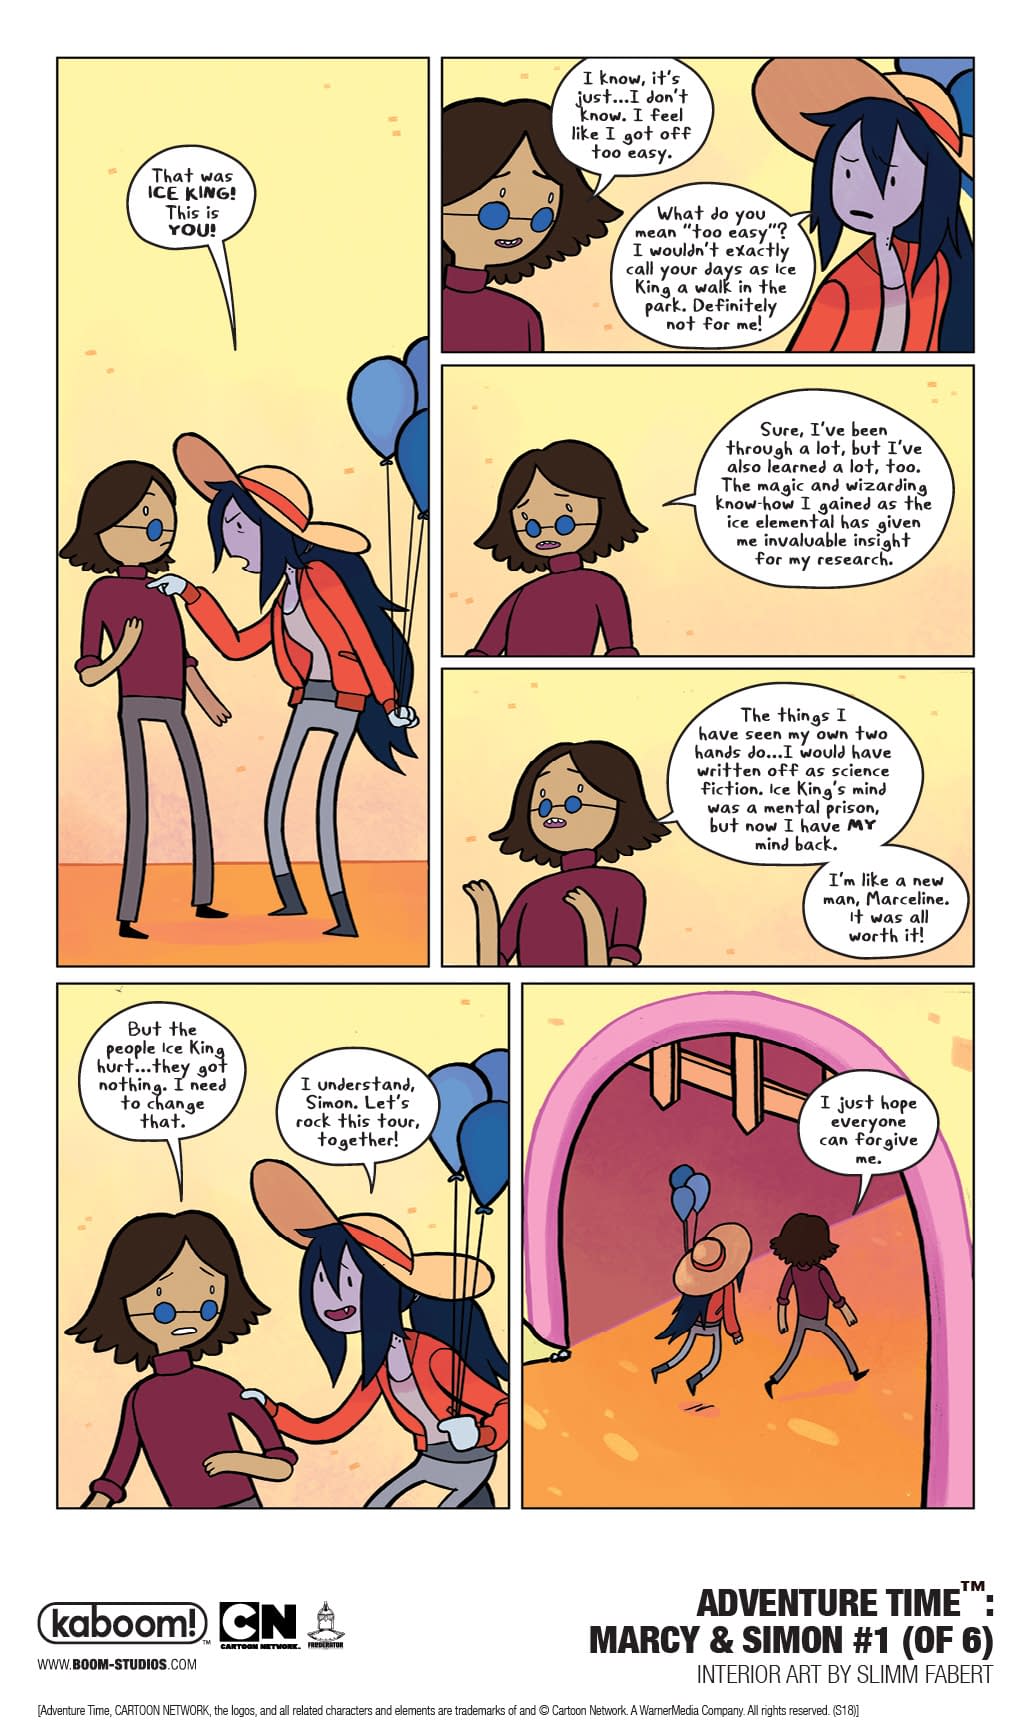 The Ice King Apology Tour Commences in 1st Look at Adventure Time: Marcy &#038; Simon #1